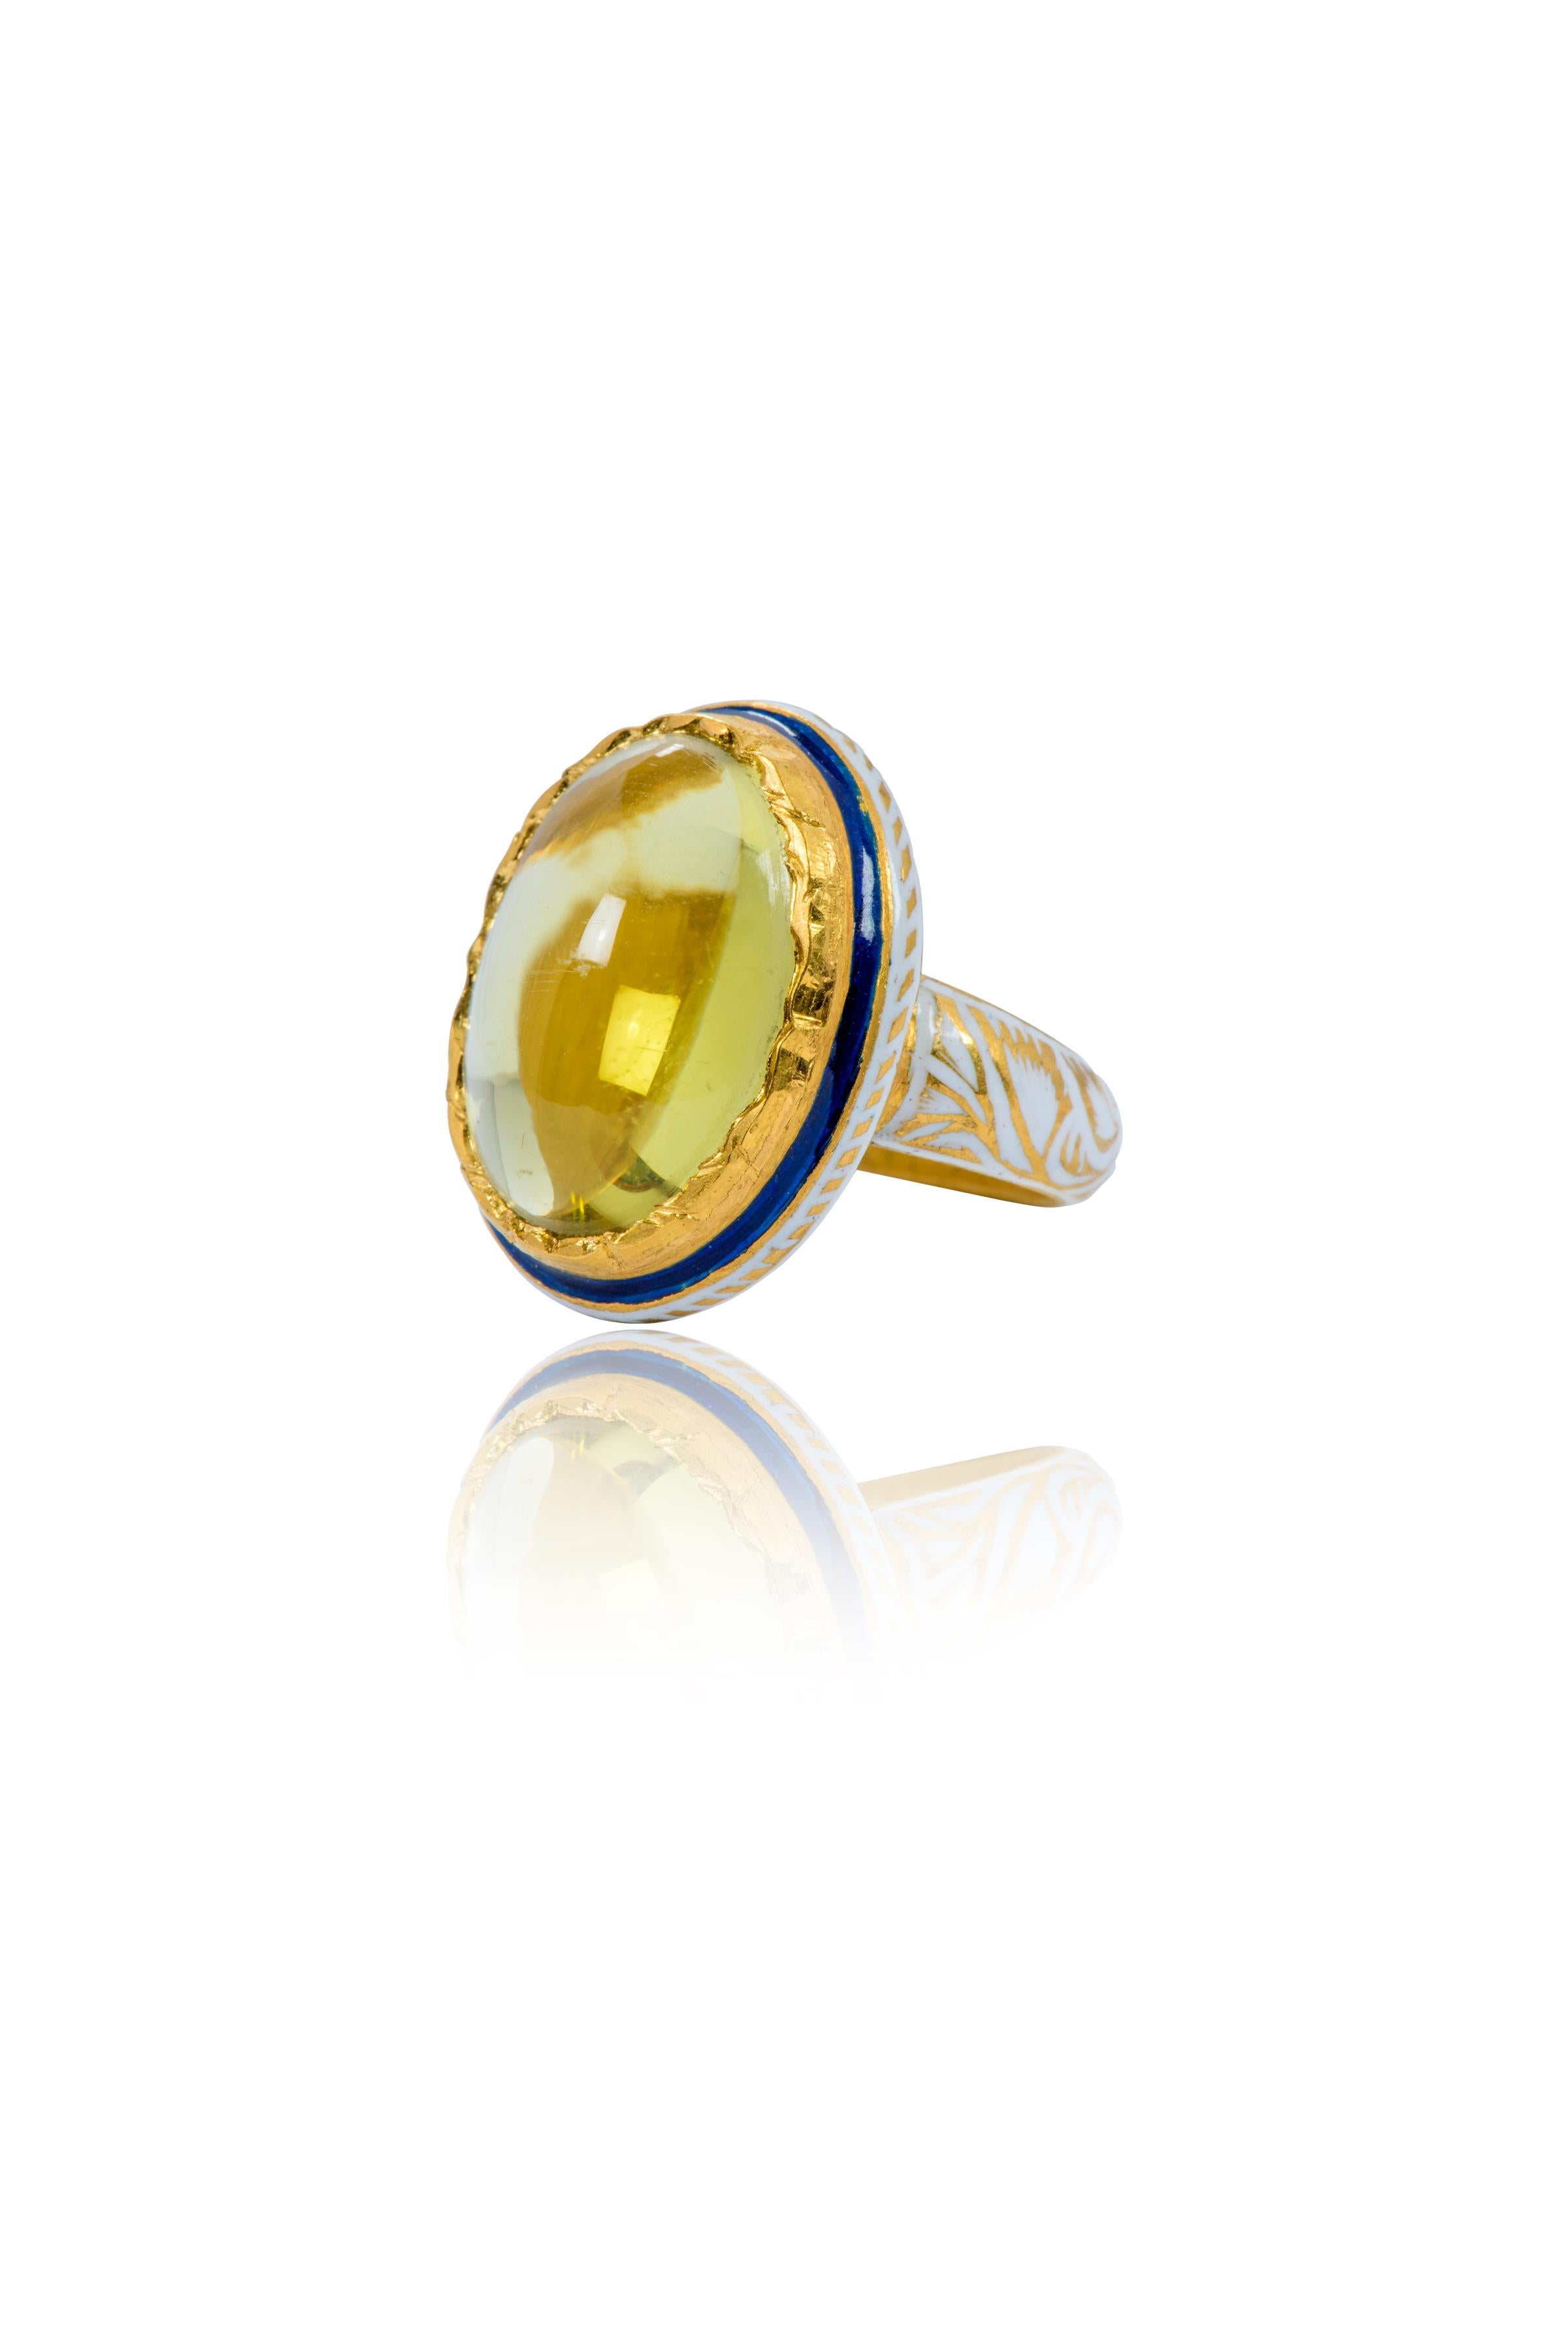 22 Karat Gold Lemon Topaz Cabochon Ring with White Enamel Work

This impressive Mughal era style hand-made tuscan sun lemon topaz ring with white enamel is majestic. The oval shaped solitaire lemon topaz cabochon is set in a hammered gold bezel